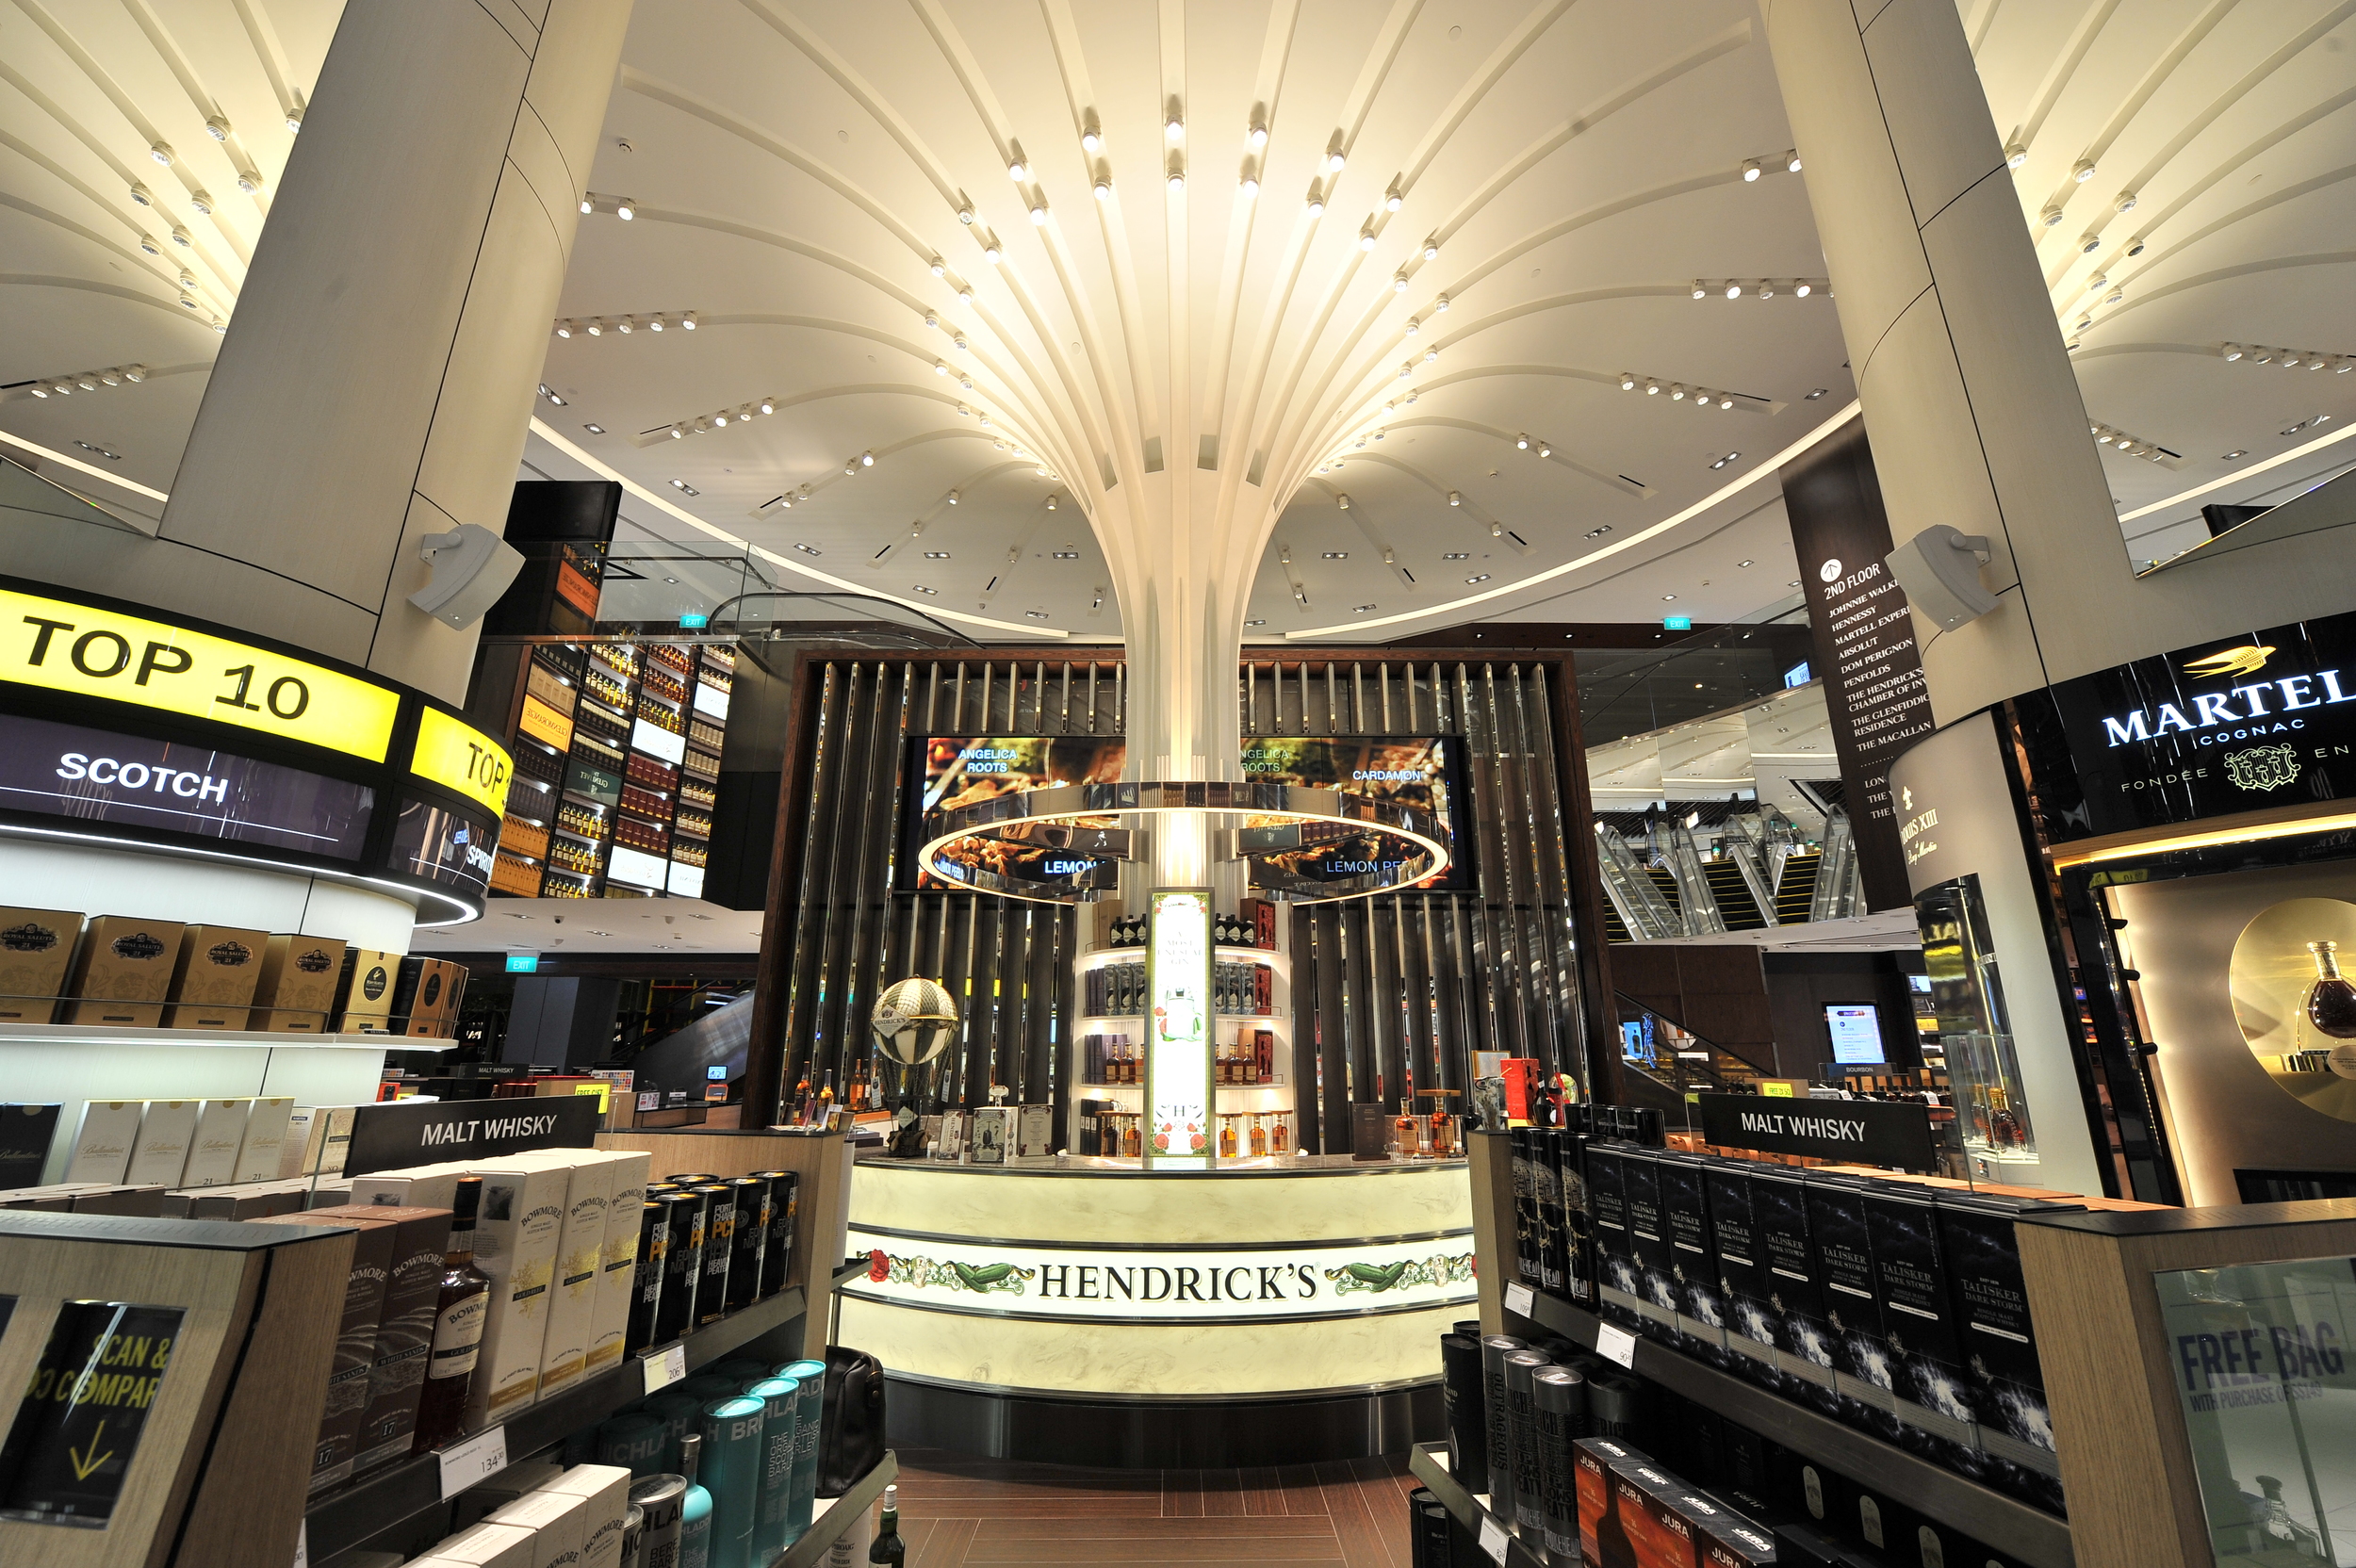 DFS Unveils New Wines And Spirits Flagship Store At Changi Airport